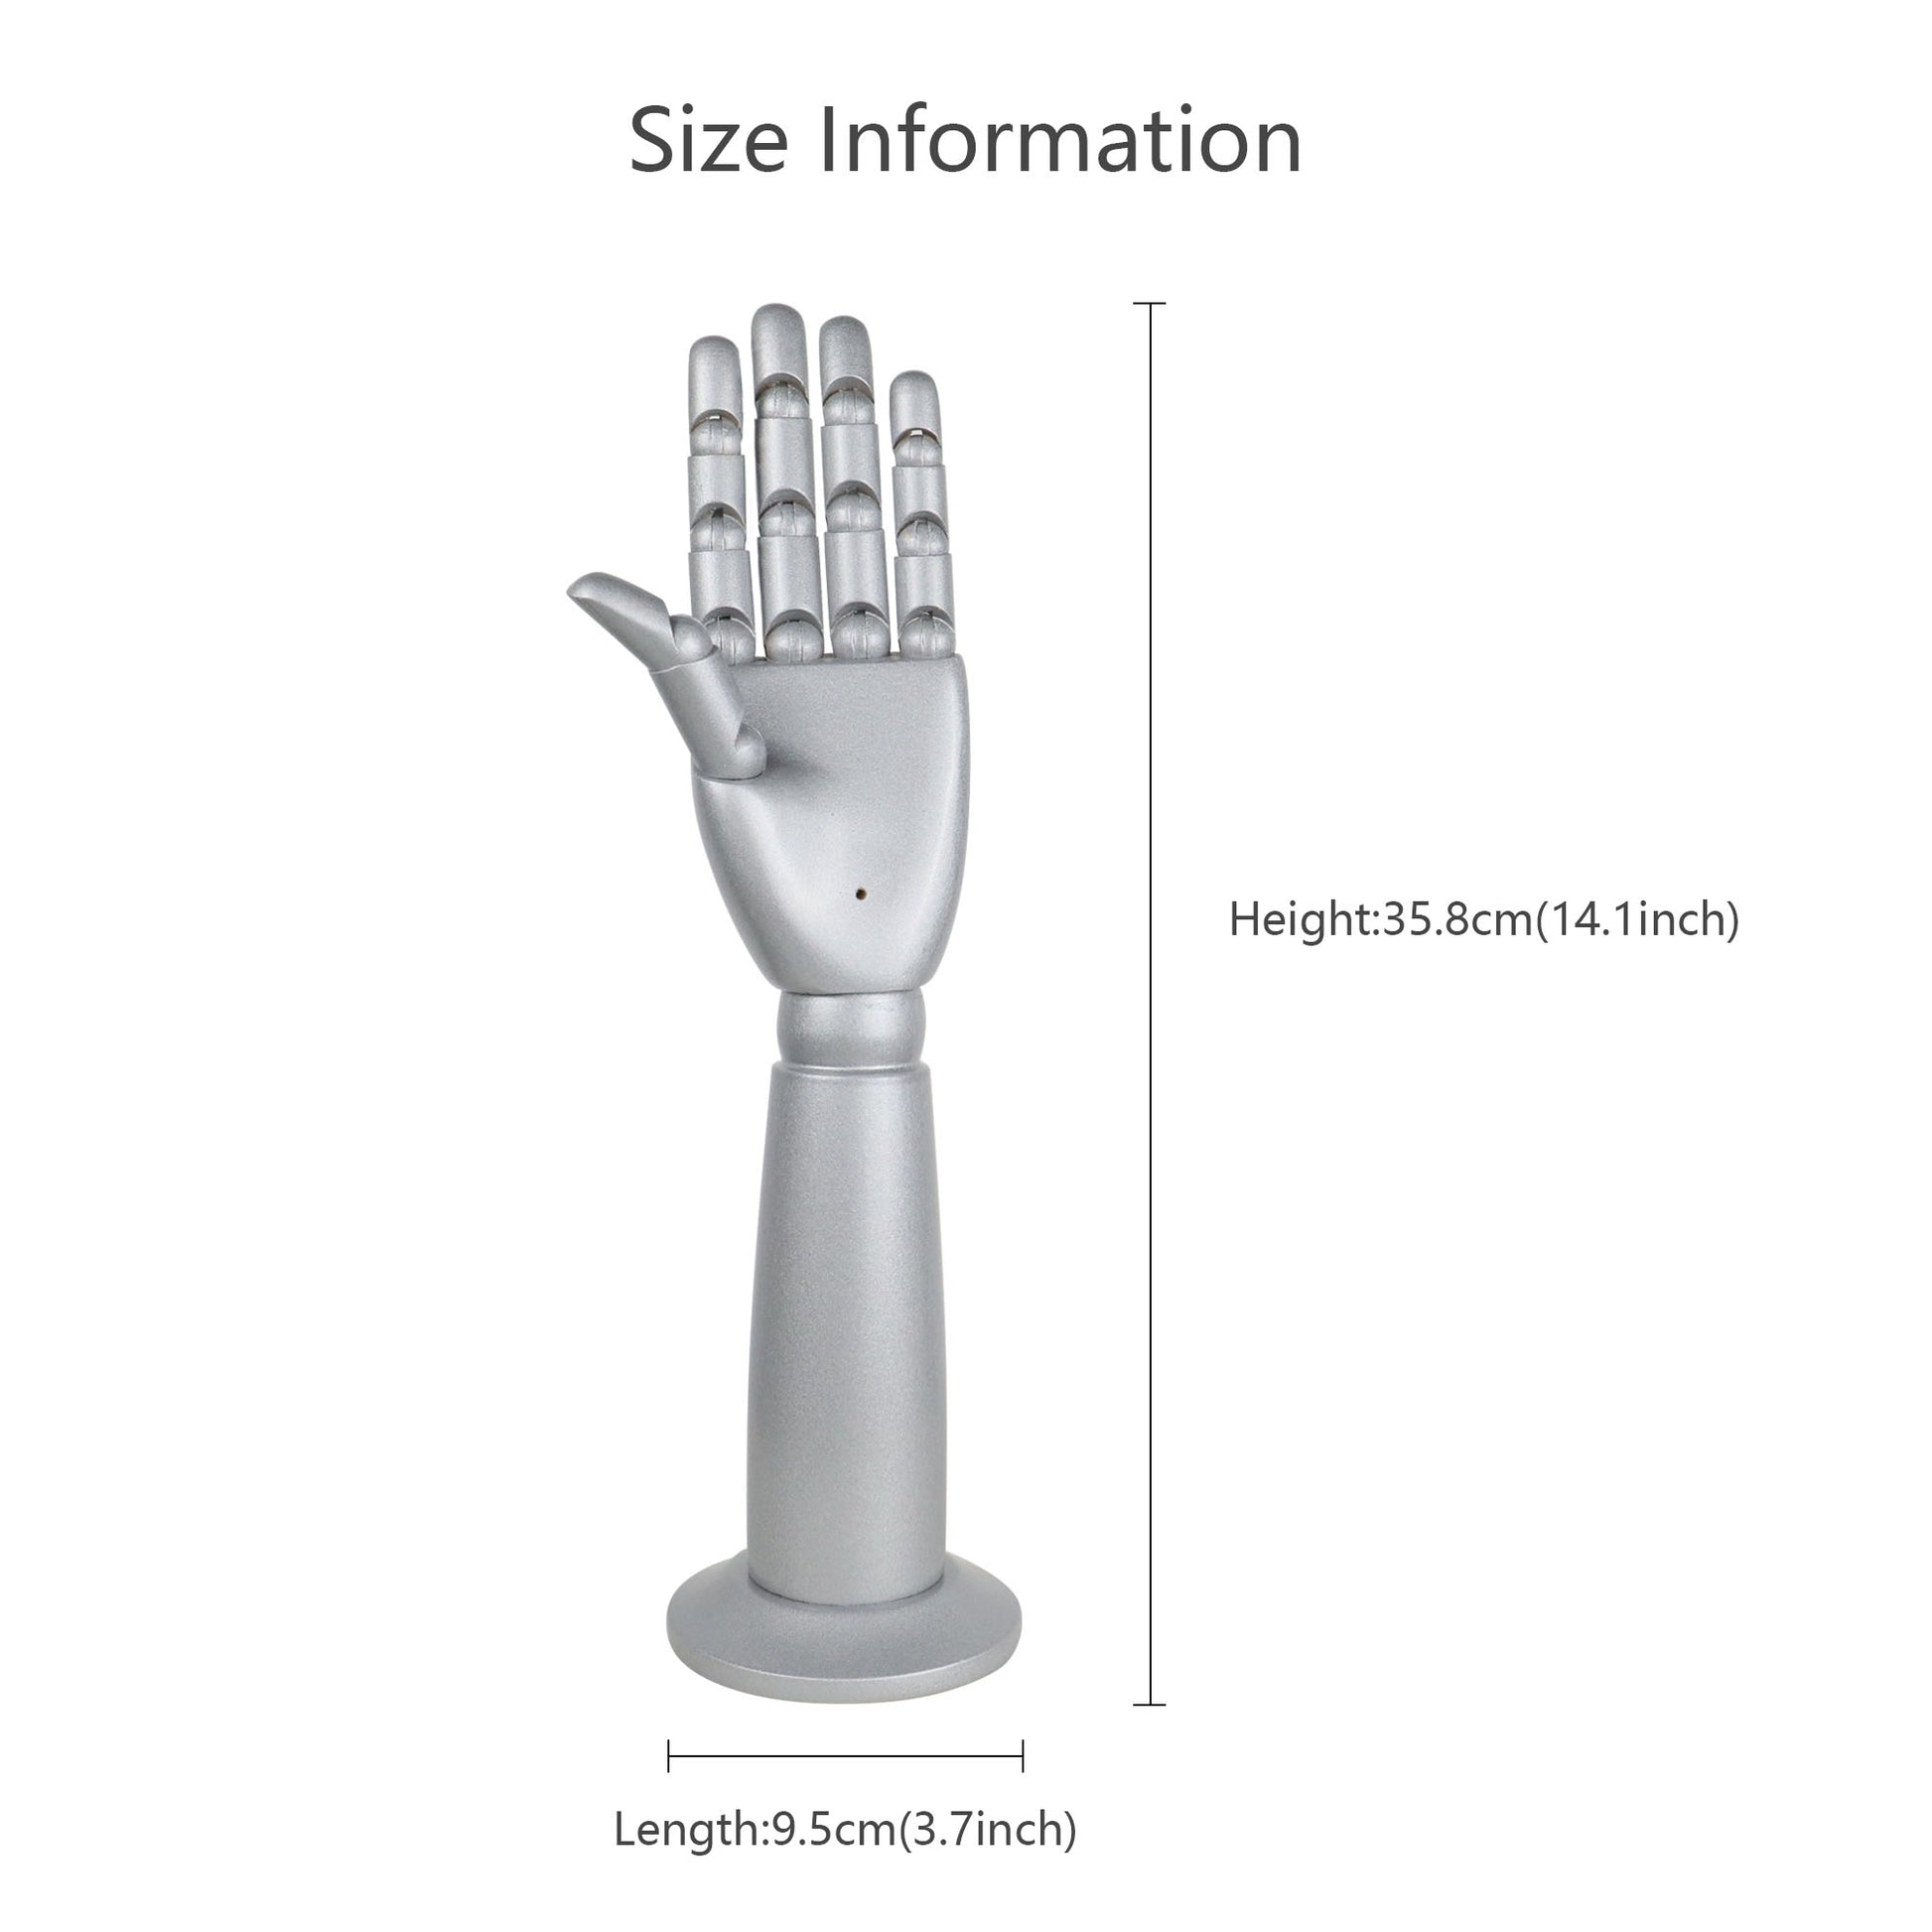 Female Wooden Hand Mannequin,High-end Woman Sliver Left Hands Form Prop, Jewelry Display for Shows,Gloves Organizer, Dress Form Mold Dummy DE-LIANG